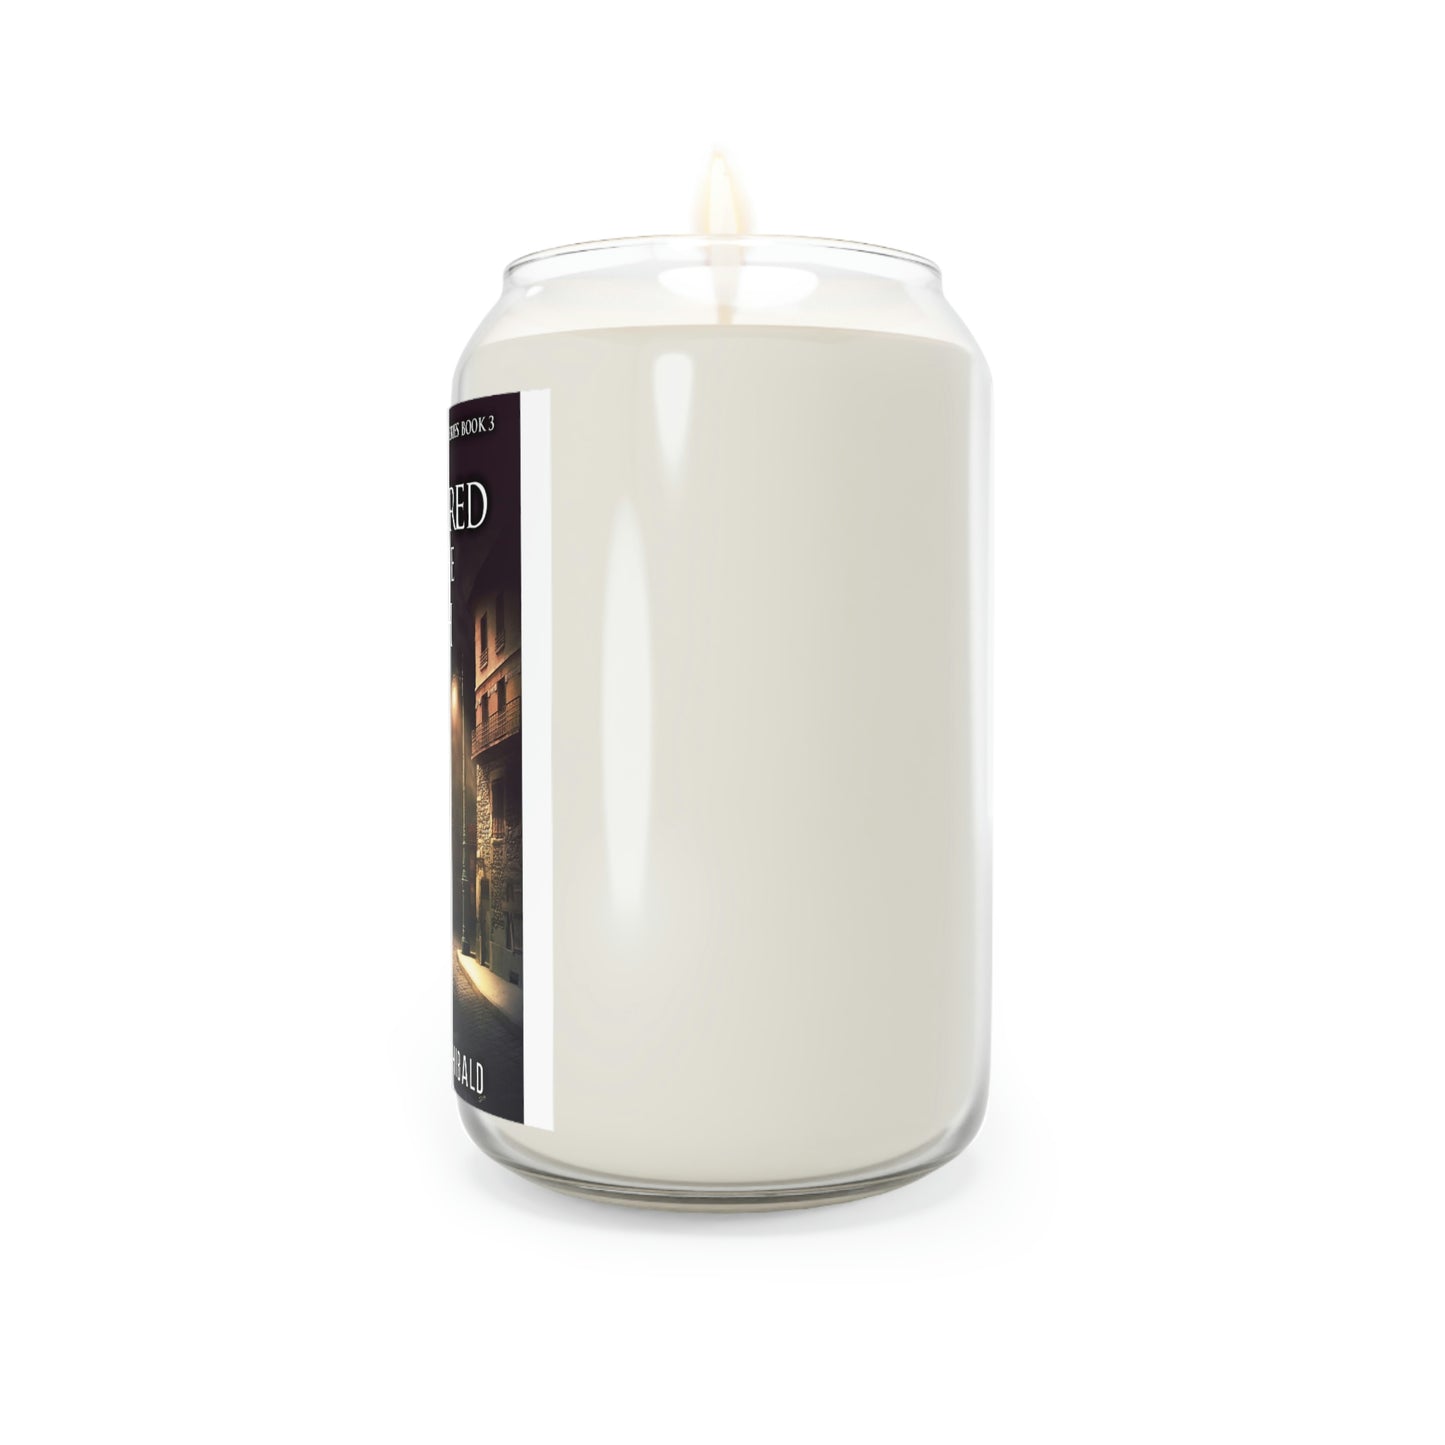 Murdered On The 13th - Scented Candle